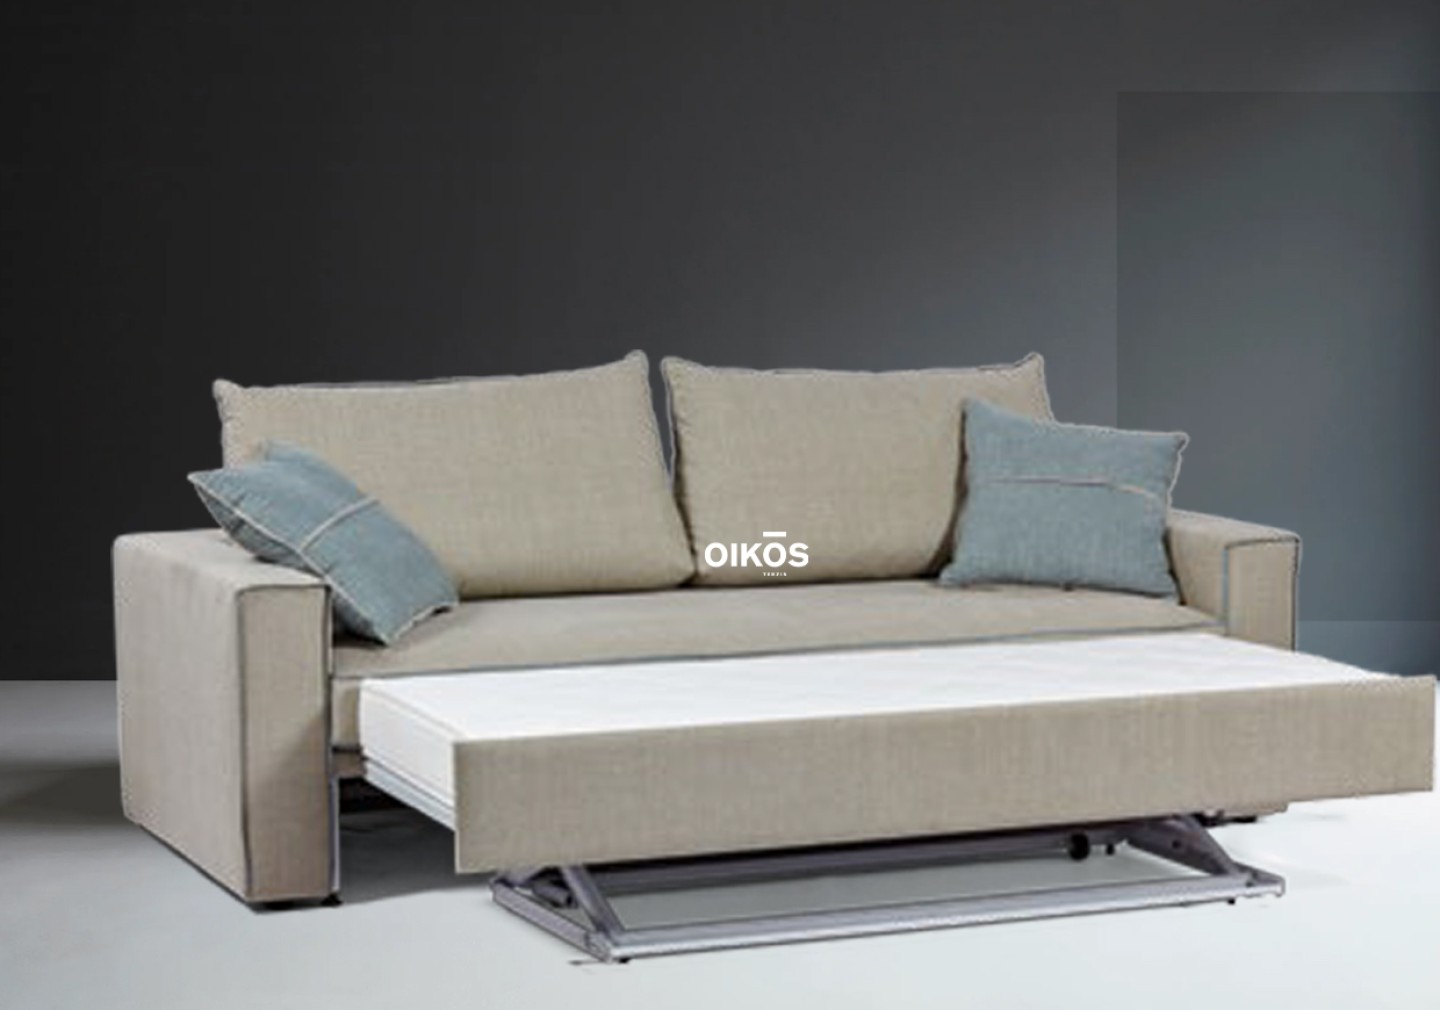 THE JULY PROFESSIONAL SOFA BED